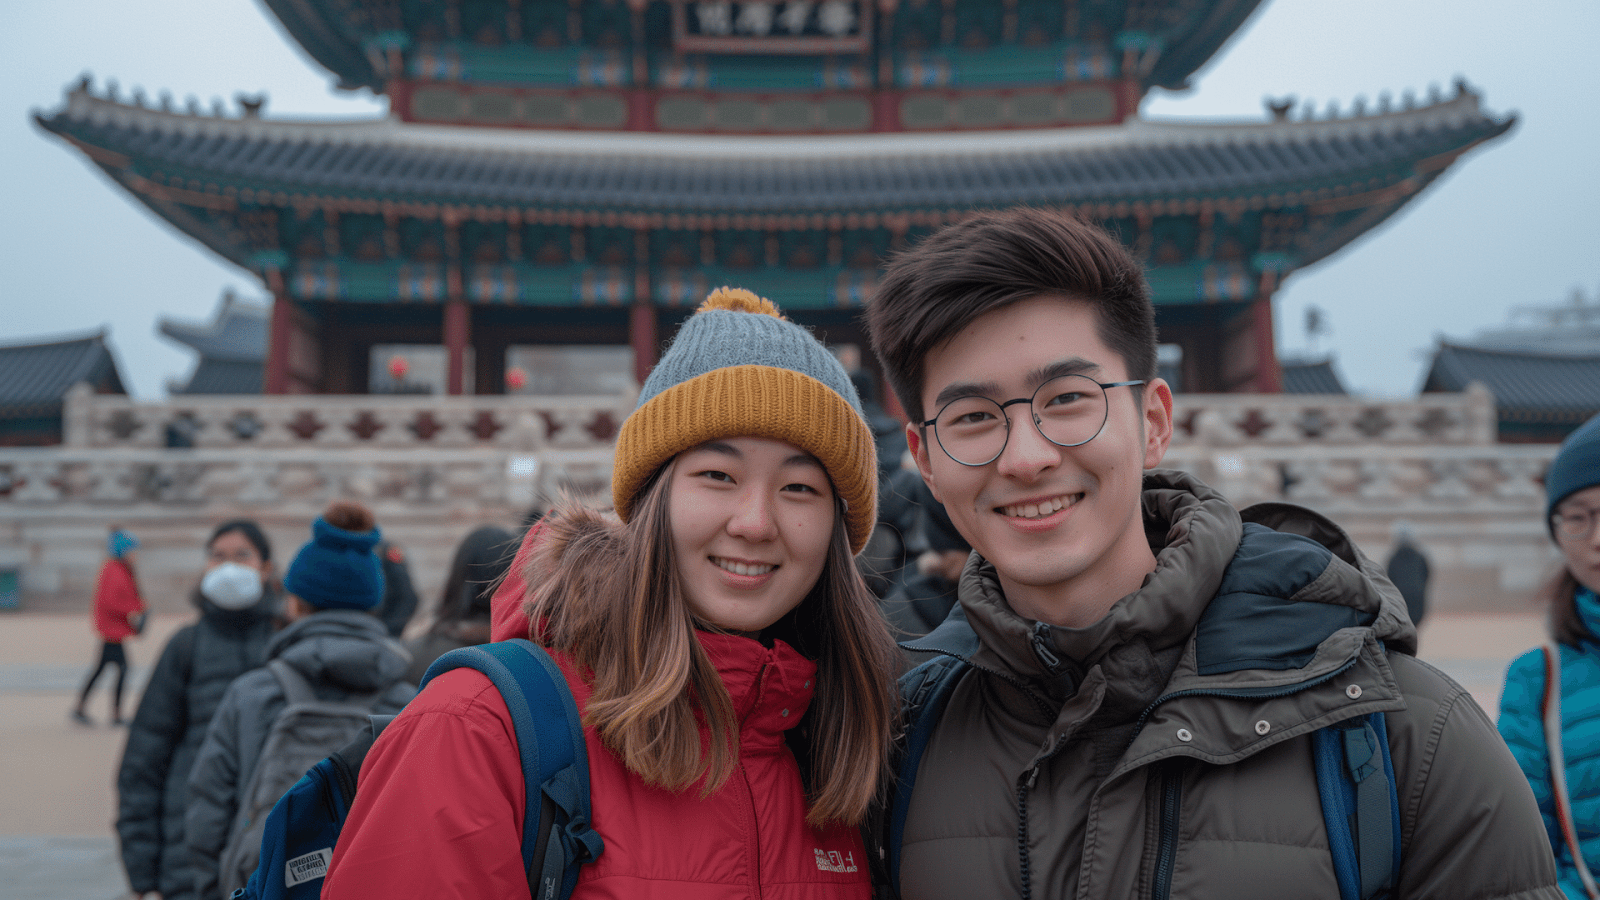 Smiling couple in winter wear at Gyeongbokgung Palace in South Korea, a must-visit for Asia travelers